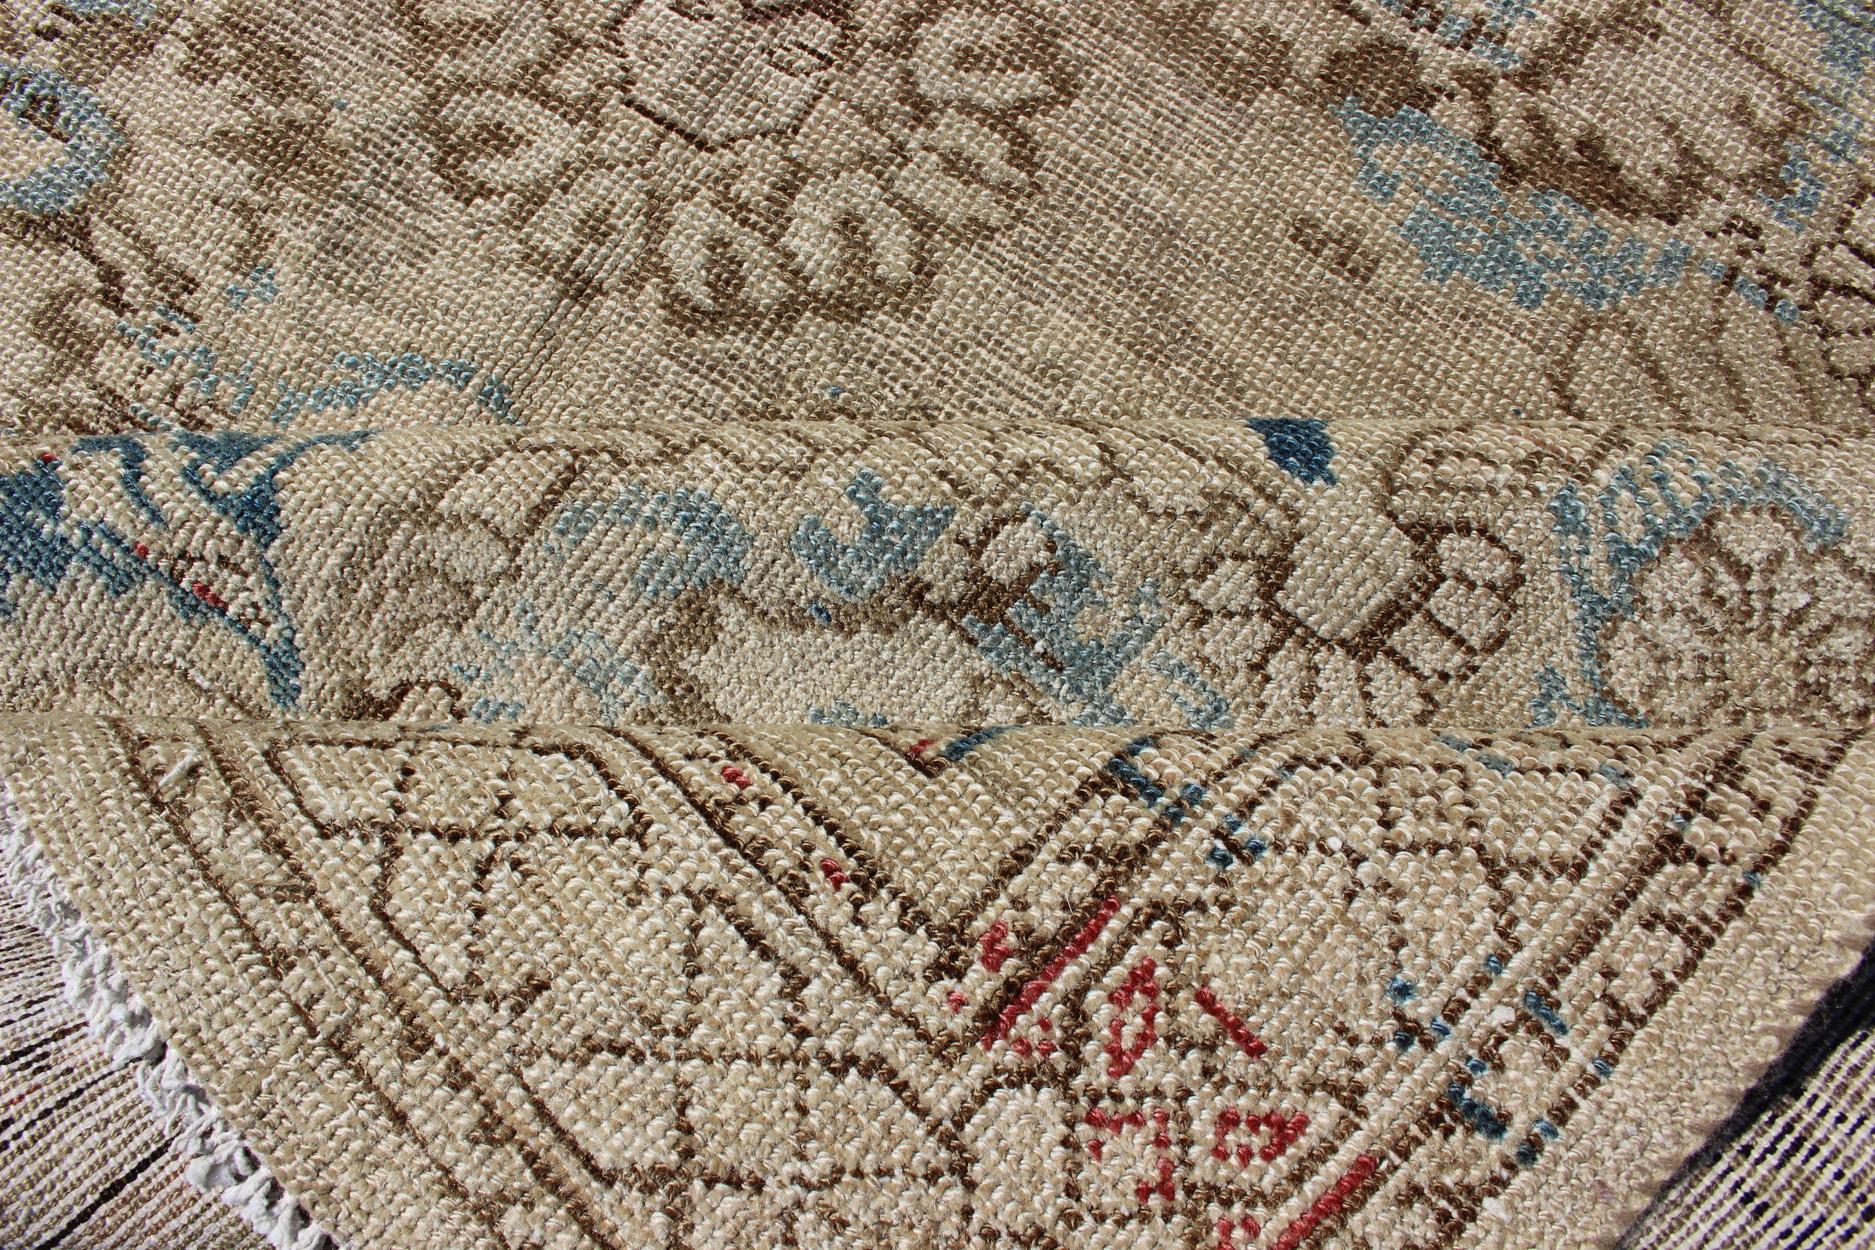 Tribal Blue and Brown Antique Persian Malayer Short Gallery Rug with Floral Medallions